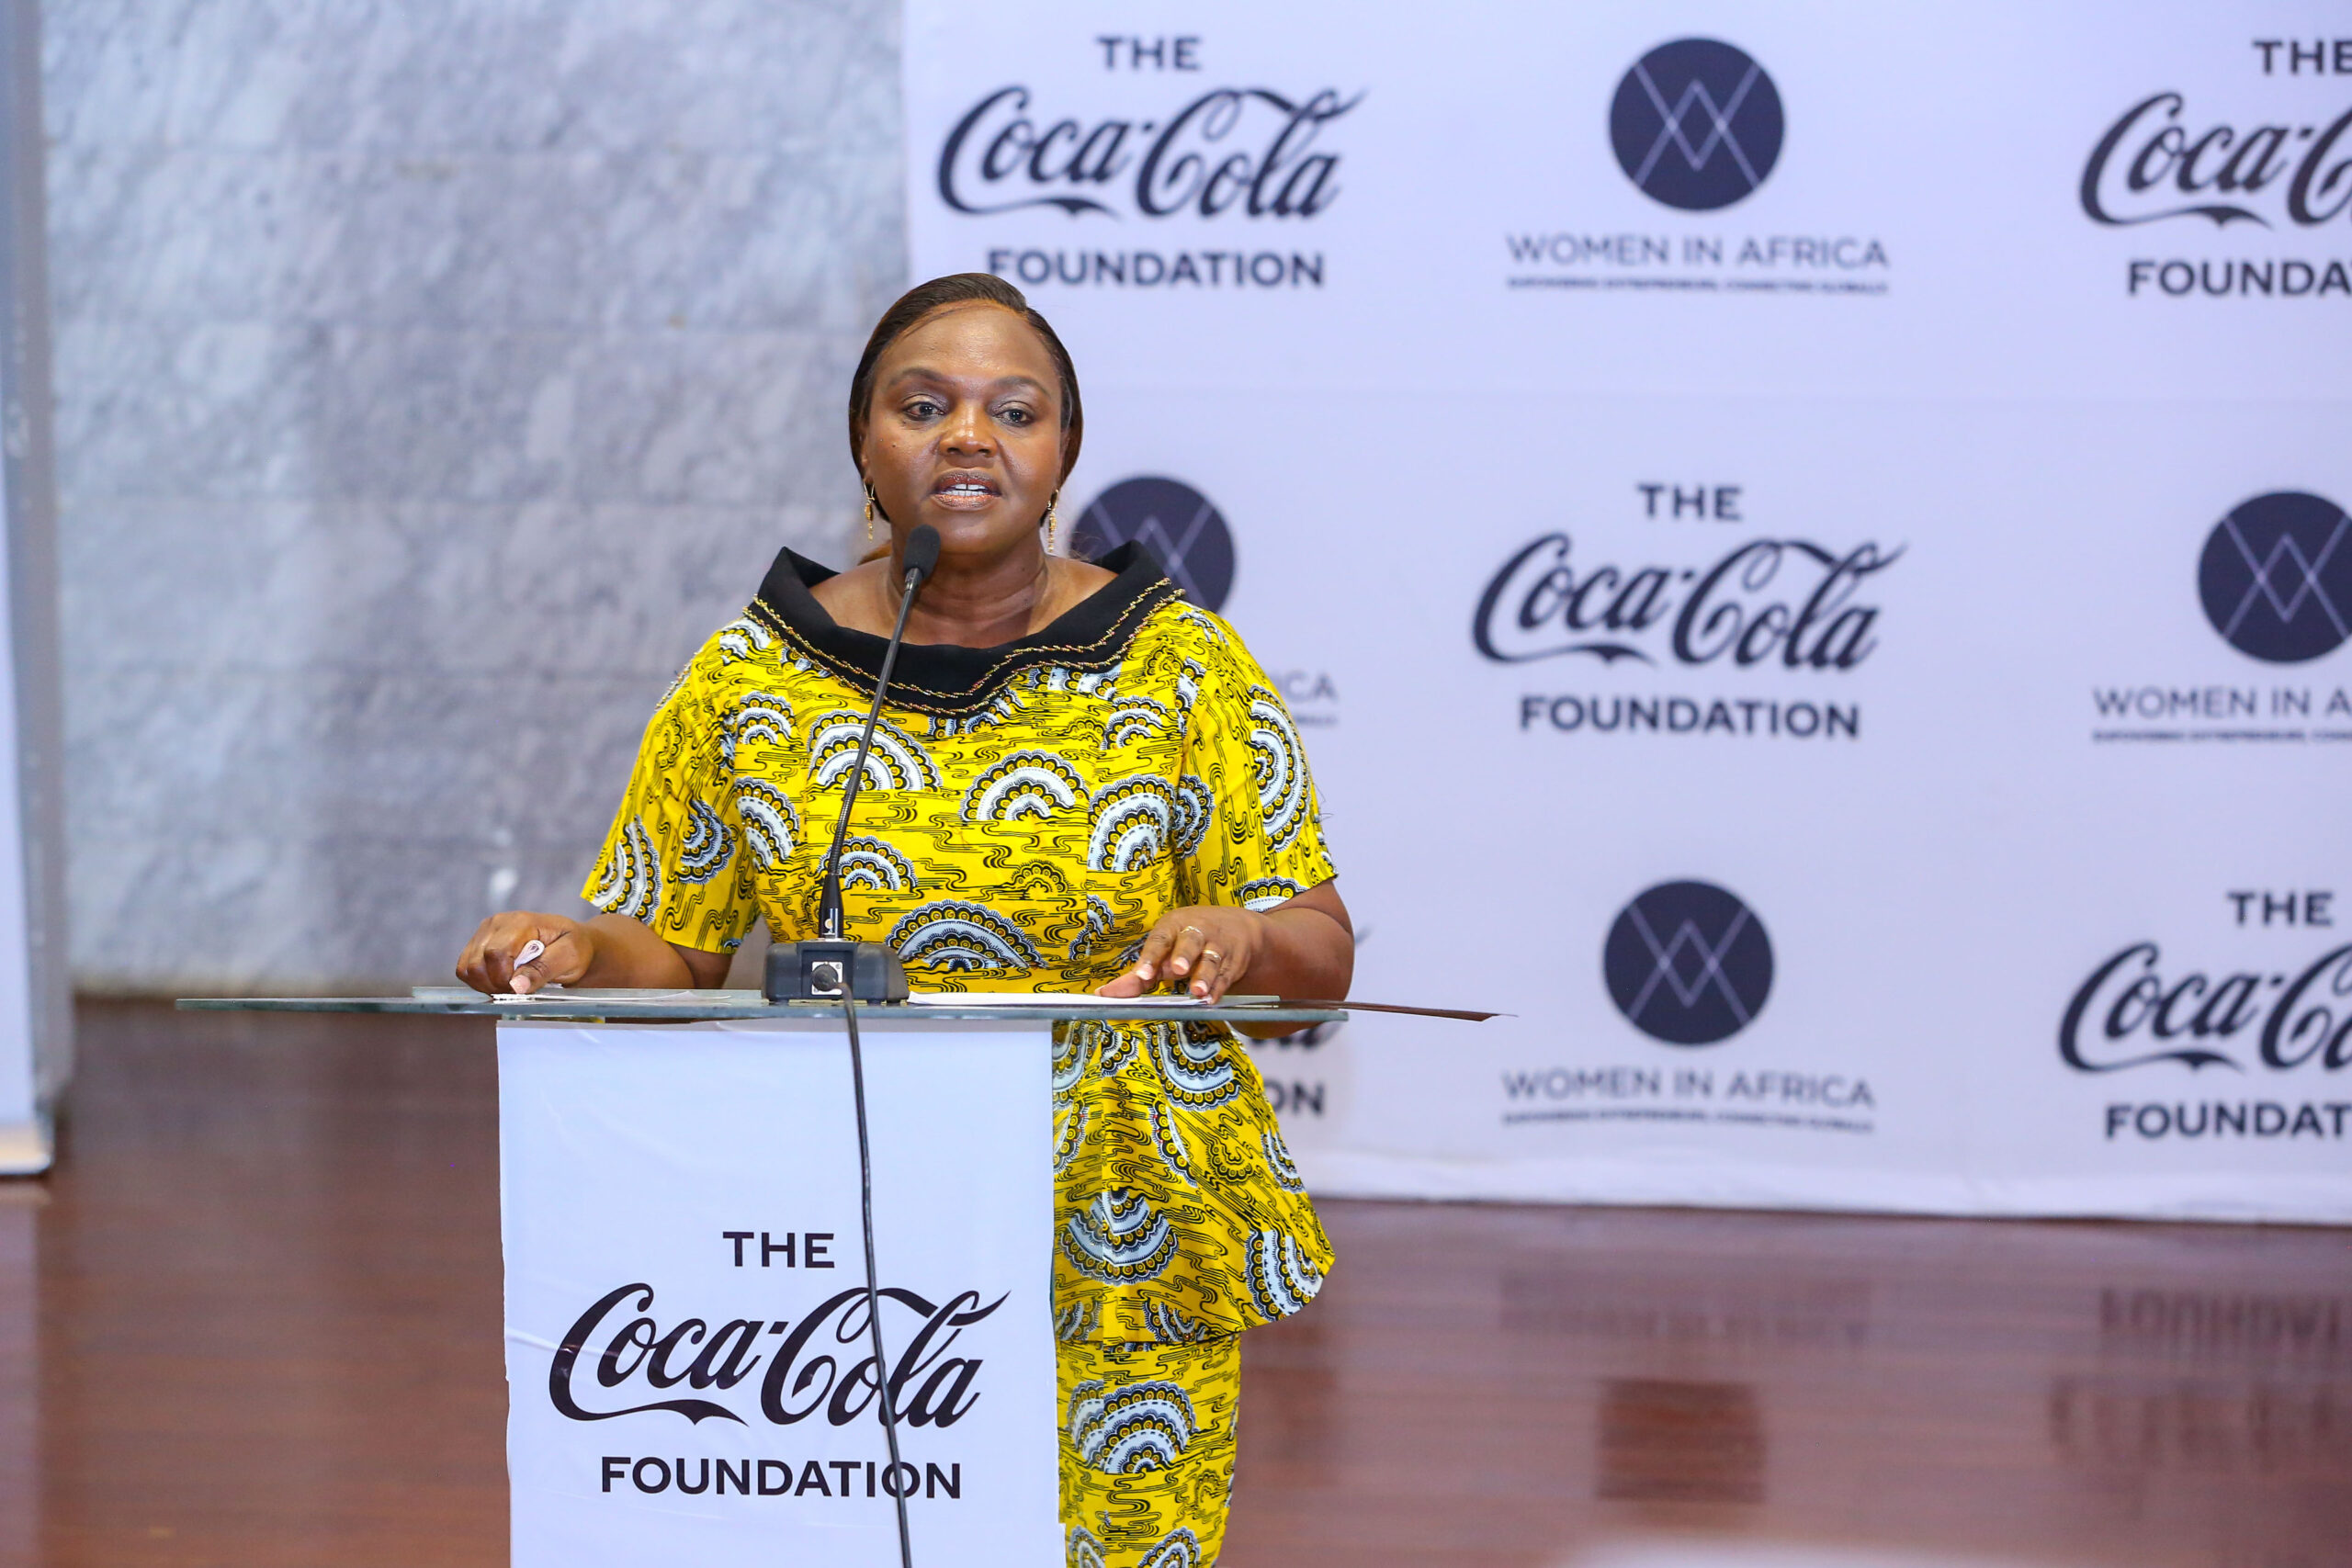 Coca-Cola Foundation partners with Women in Africa to launch a women empowerment program